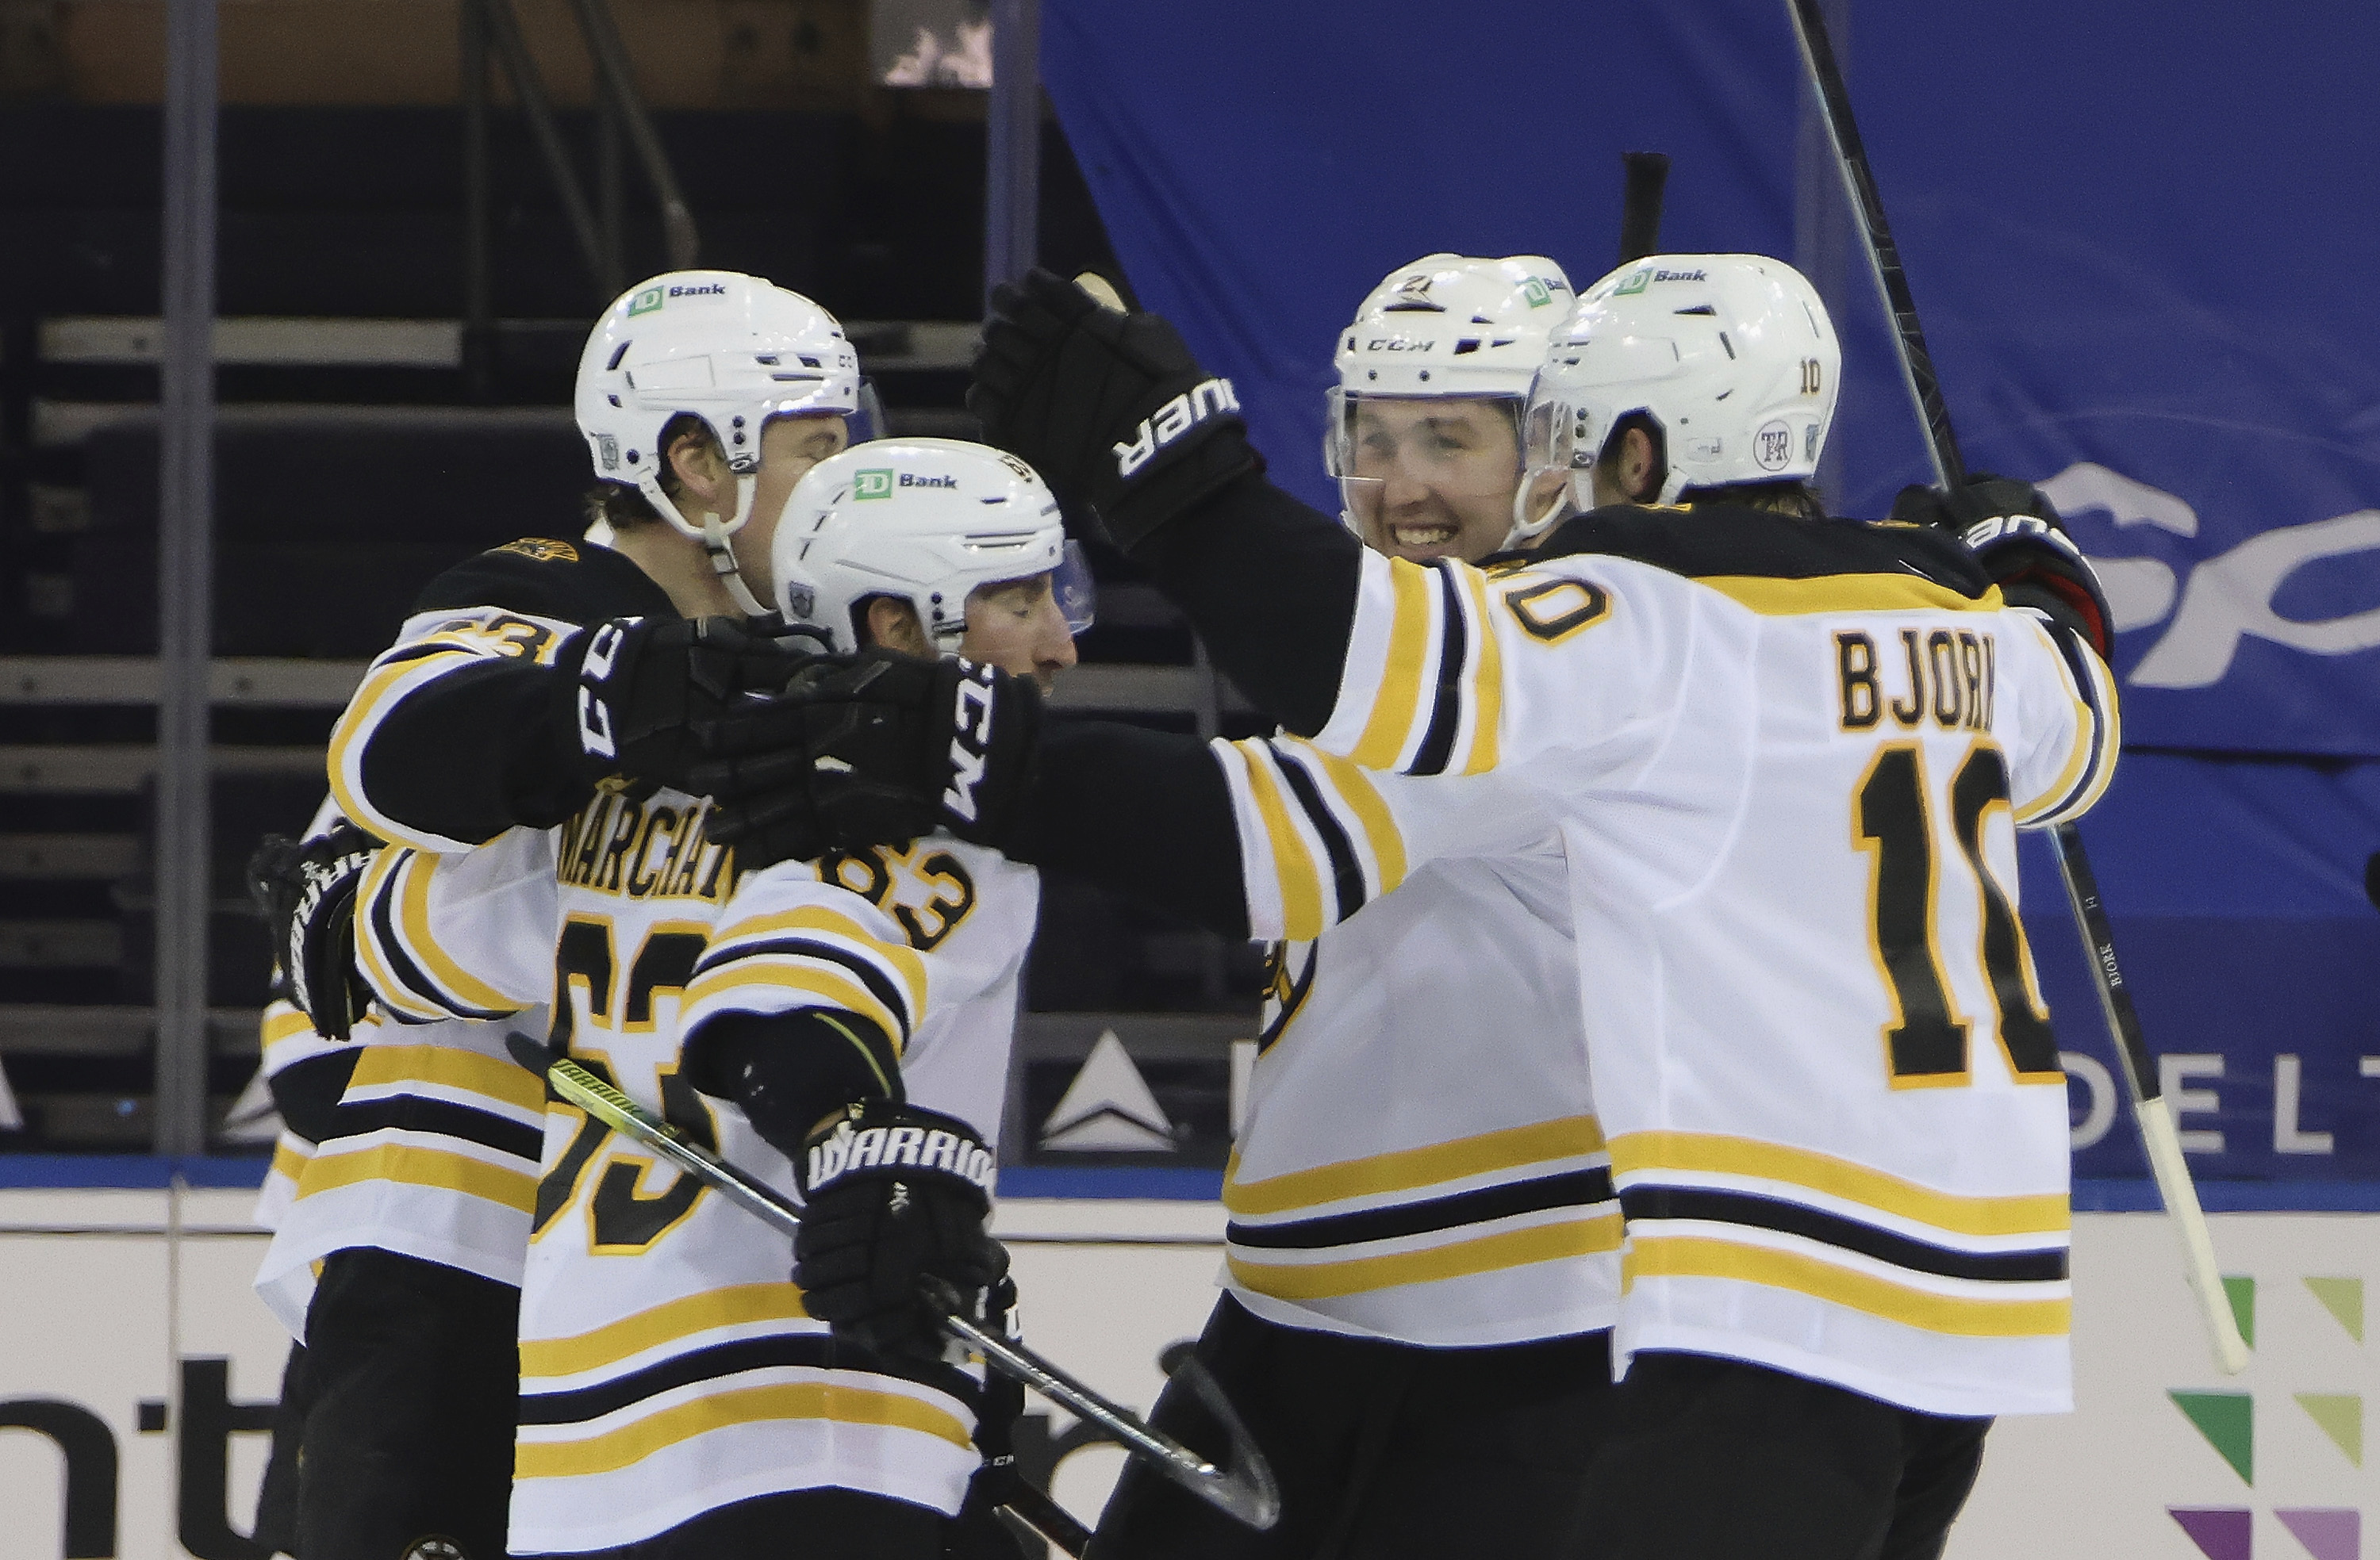 NHL How to LIVE STREAM FREE the Boston Bruins at New York Rangers Friday (2-12-21)